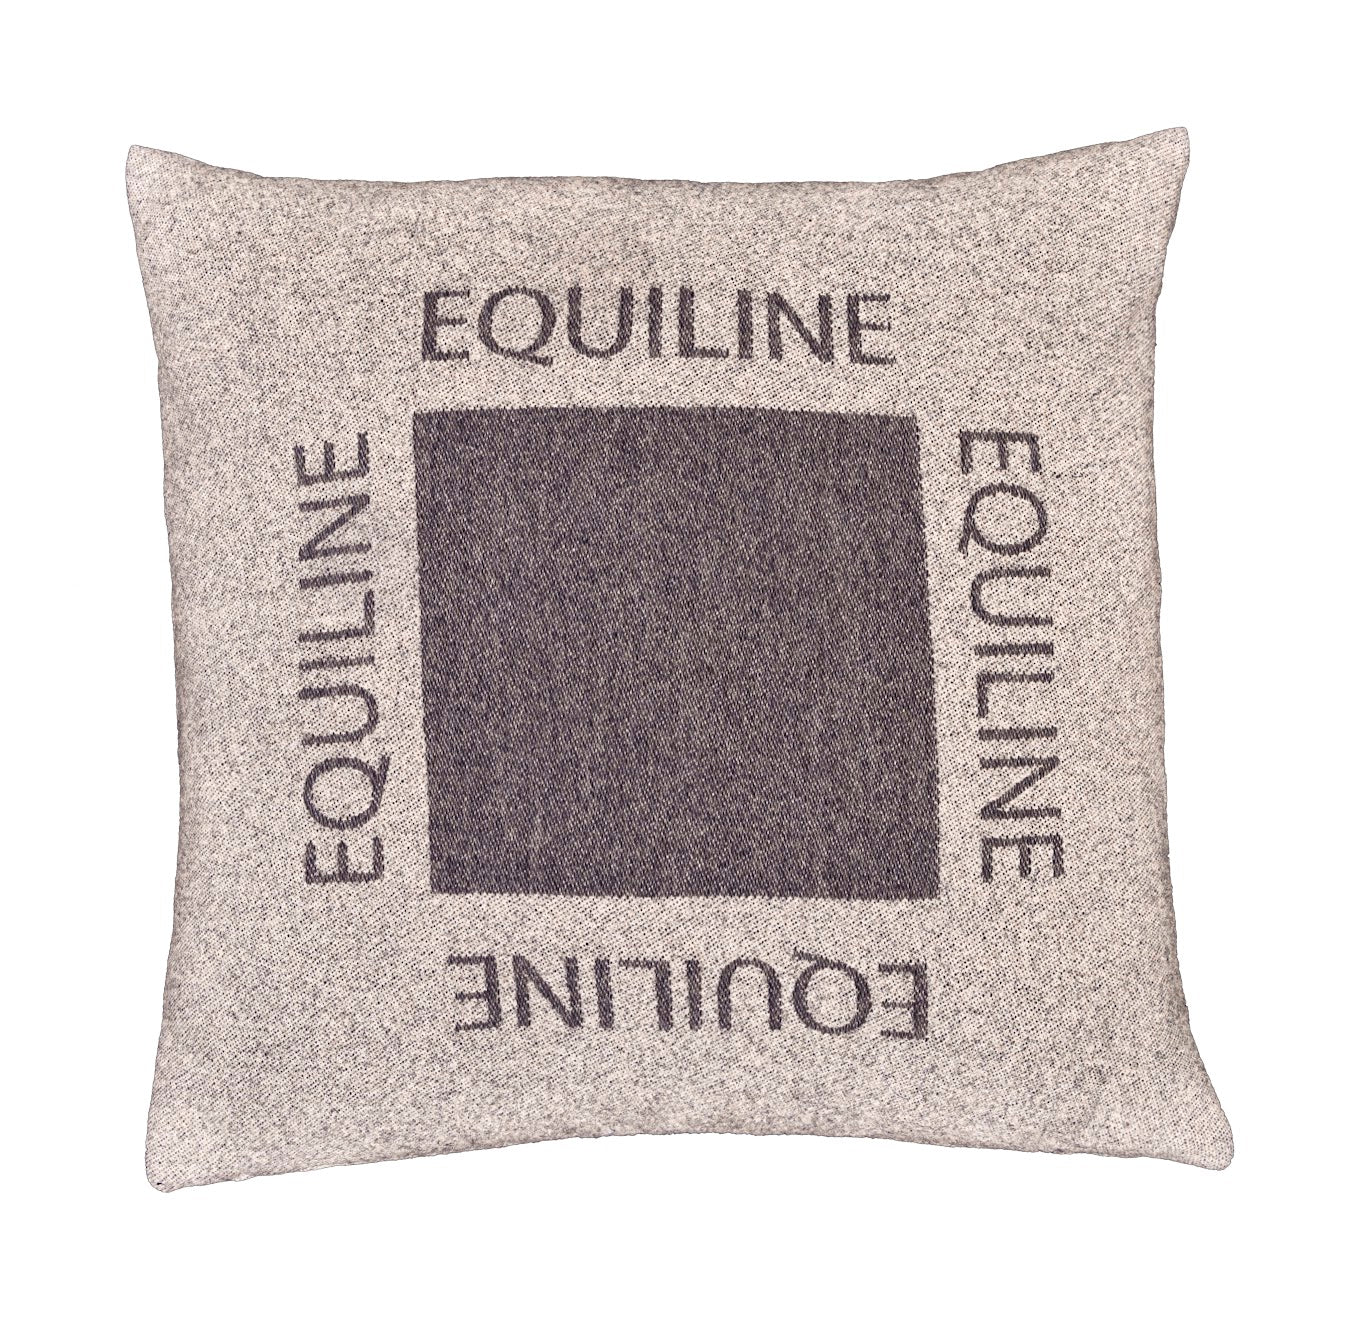 The Namian Christmas cushion is part of Equiline’s new homeware range. This beautiful two tone cushion cover comes in two colours.  Measurements: 50x50cm